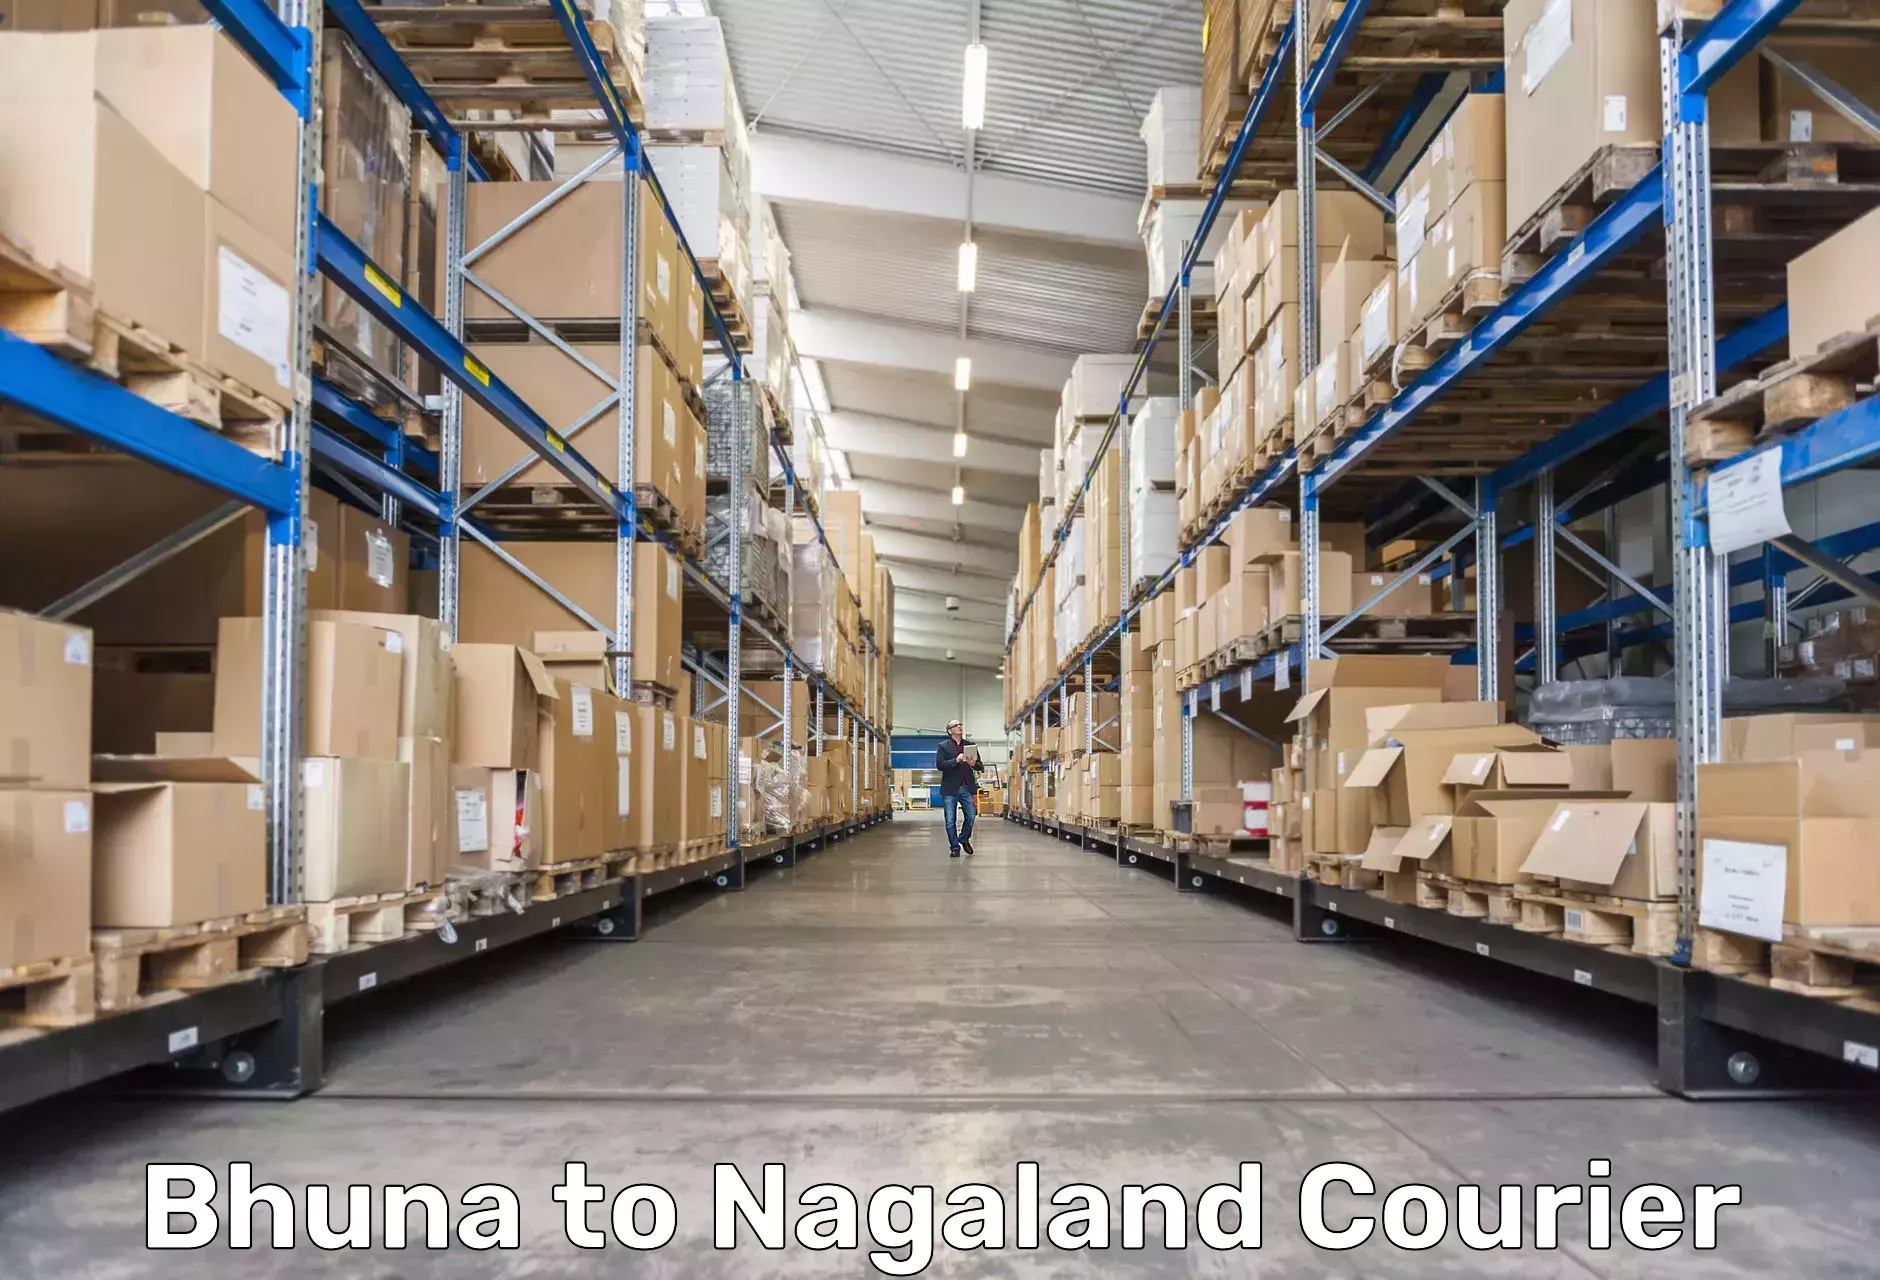 Next-day delivery options Bhuna to Nagaland